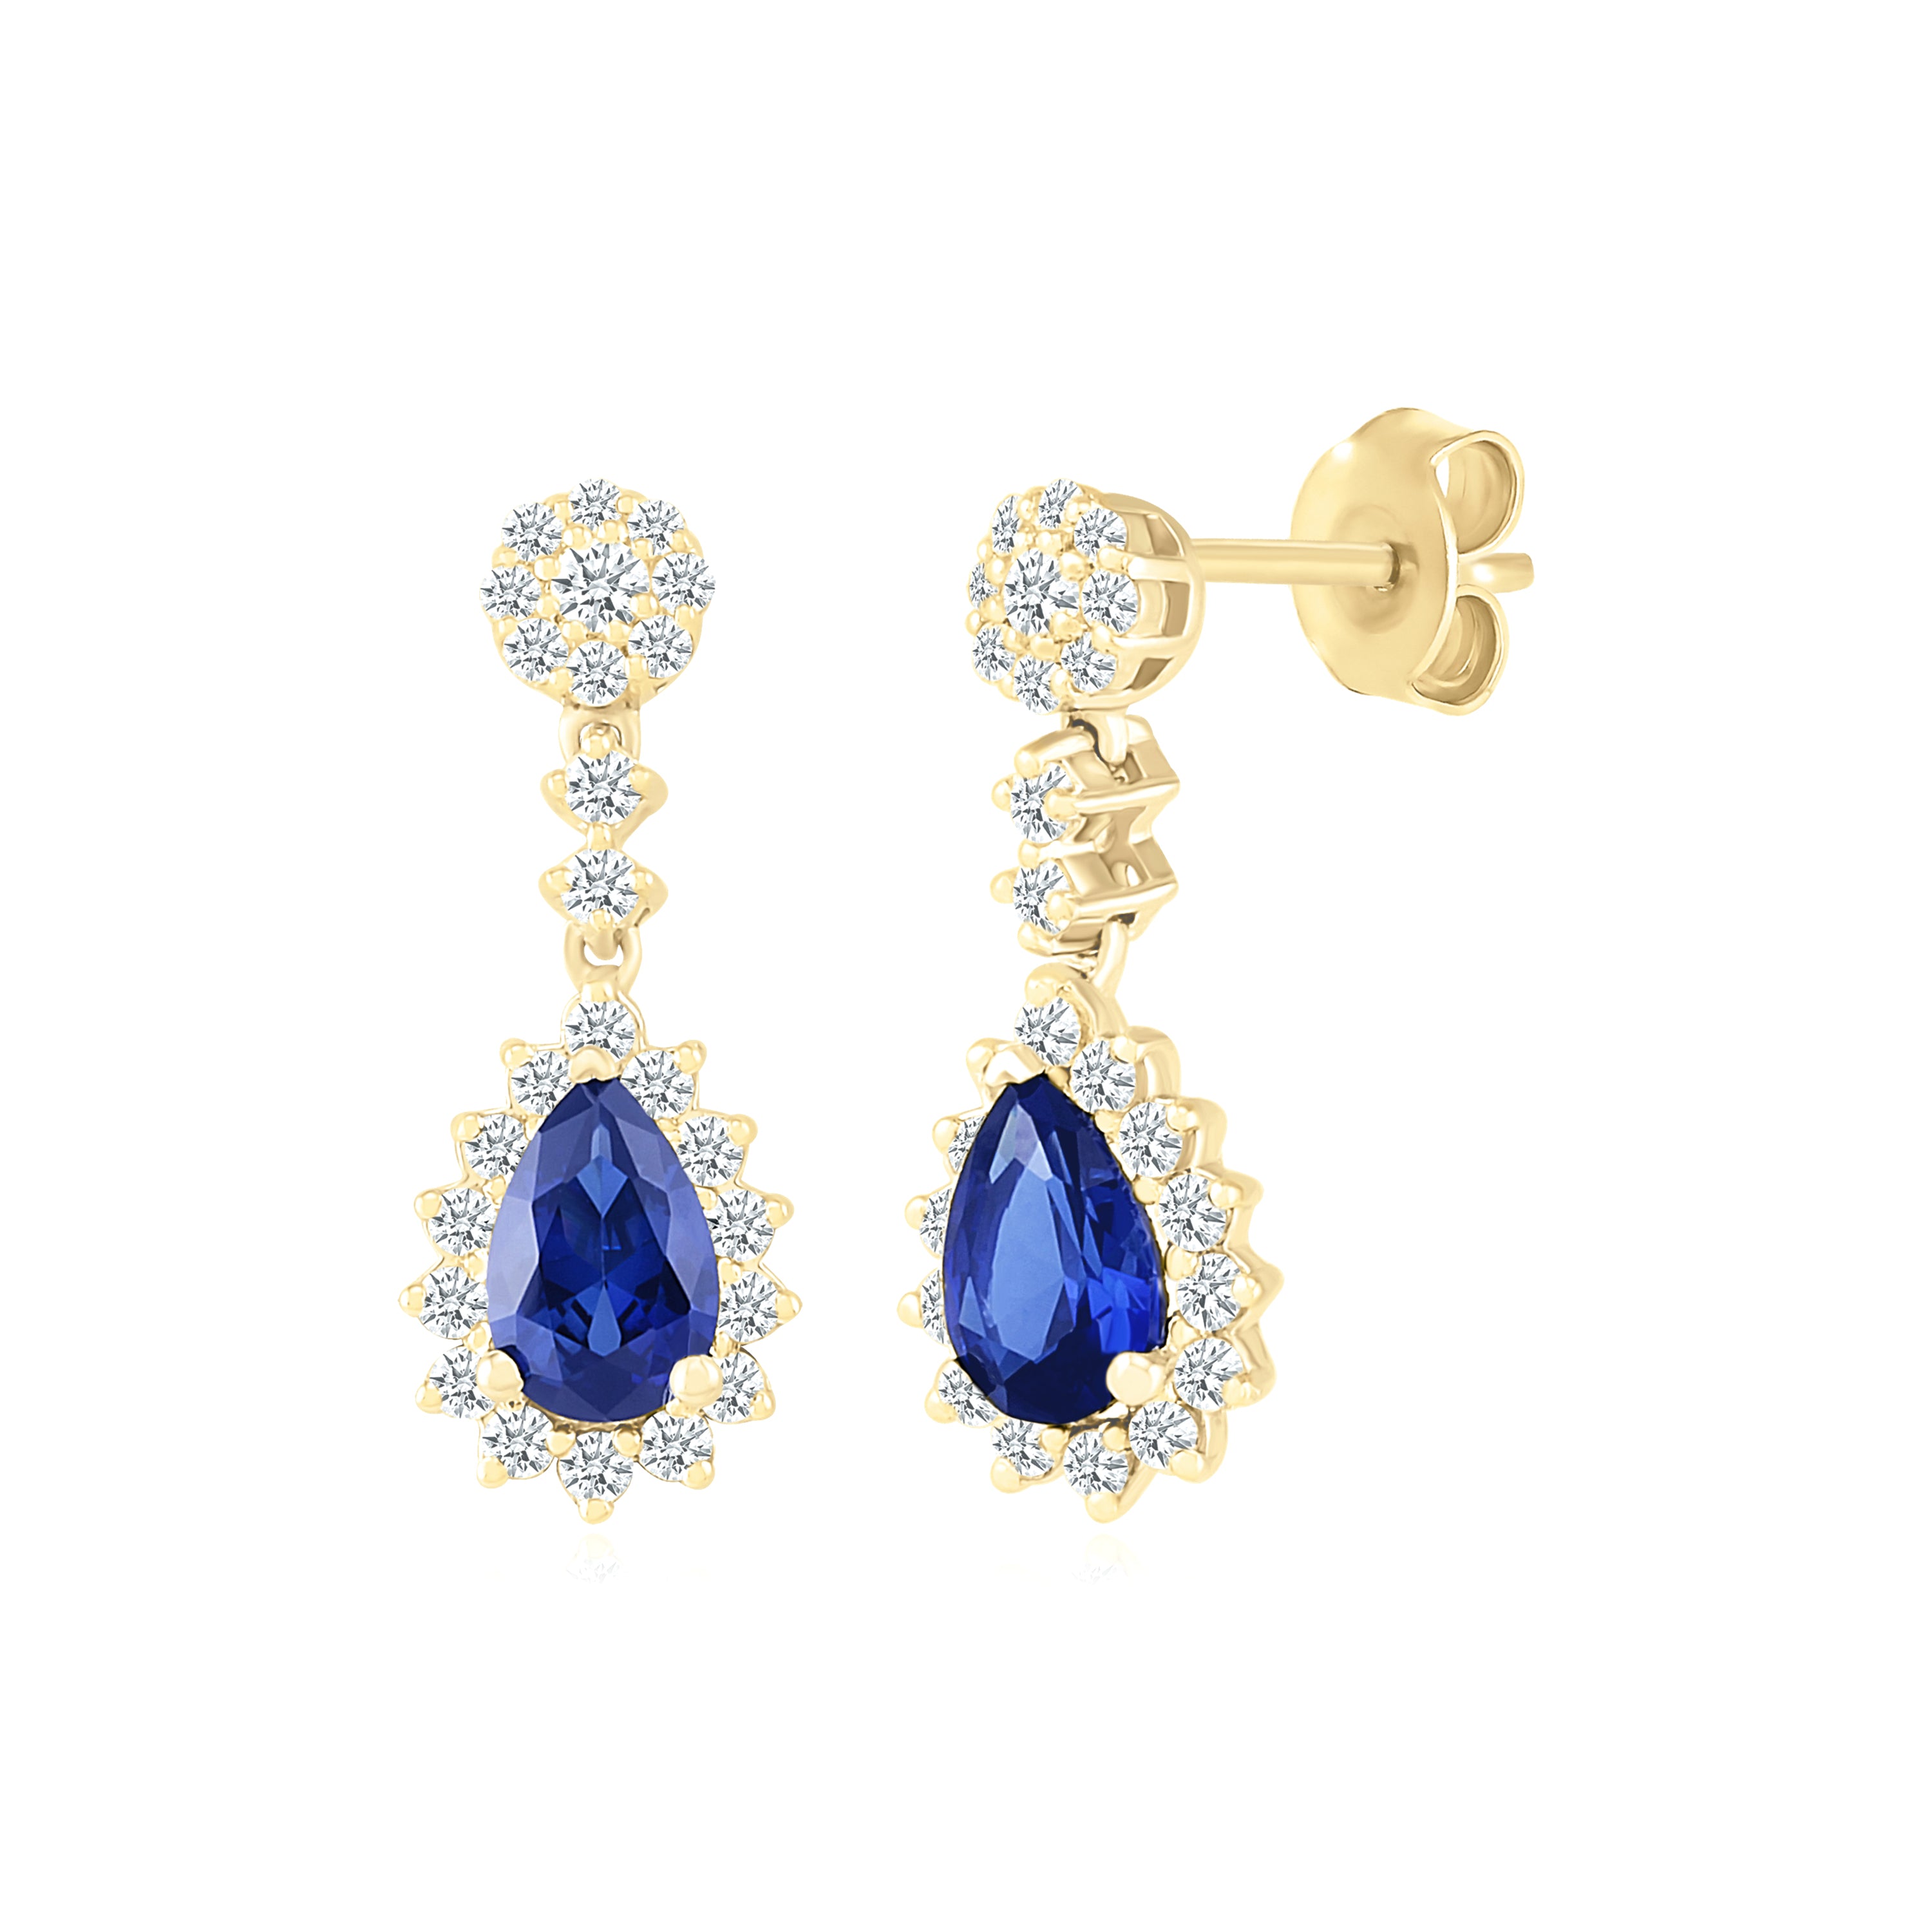 Blue Sapphire Dangle Earrings with White Sapphire Halo Earrings Estella Collection #product_description# 32654 10k Birthstone blue #tag4# #tag5# #tag6# #tag7# #tag8# #tag9# #tag10#